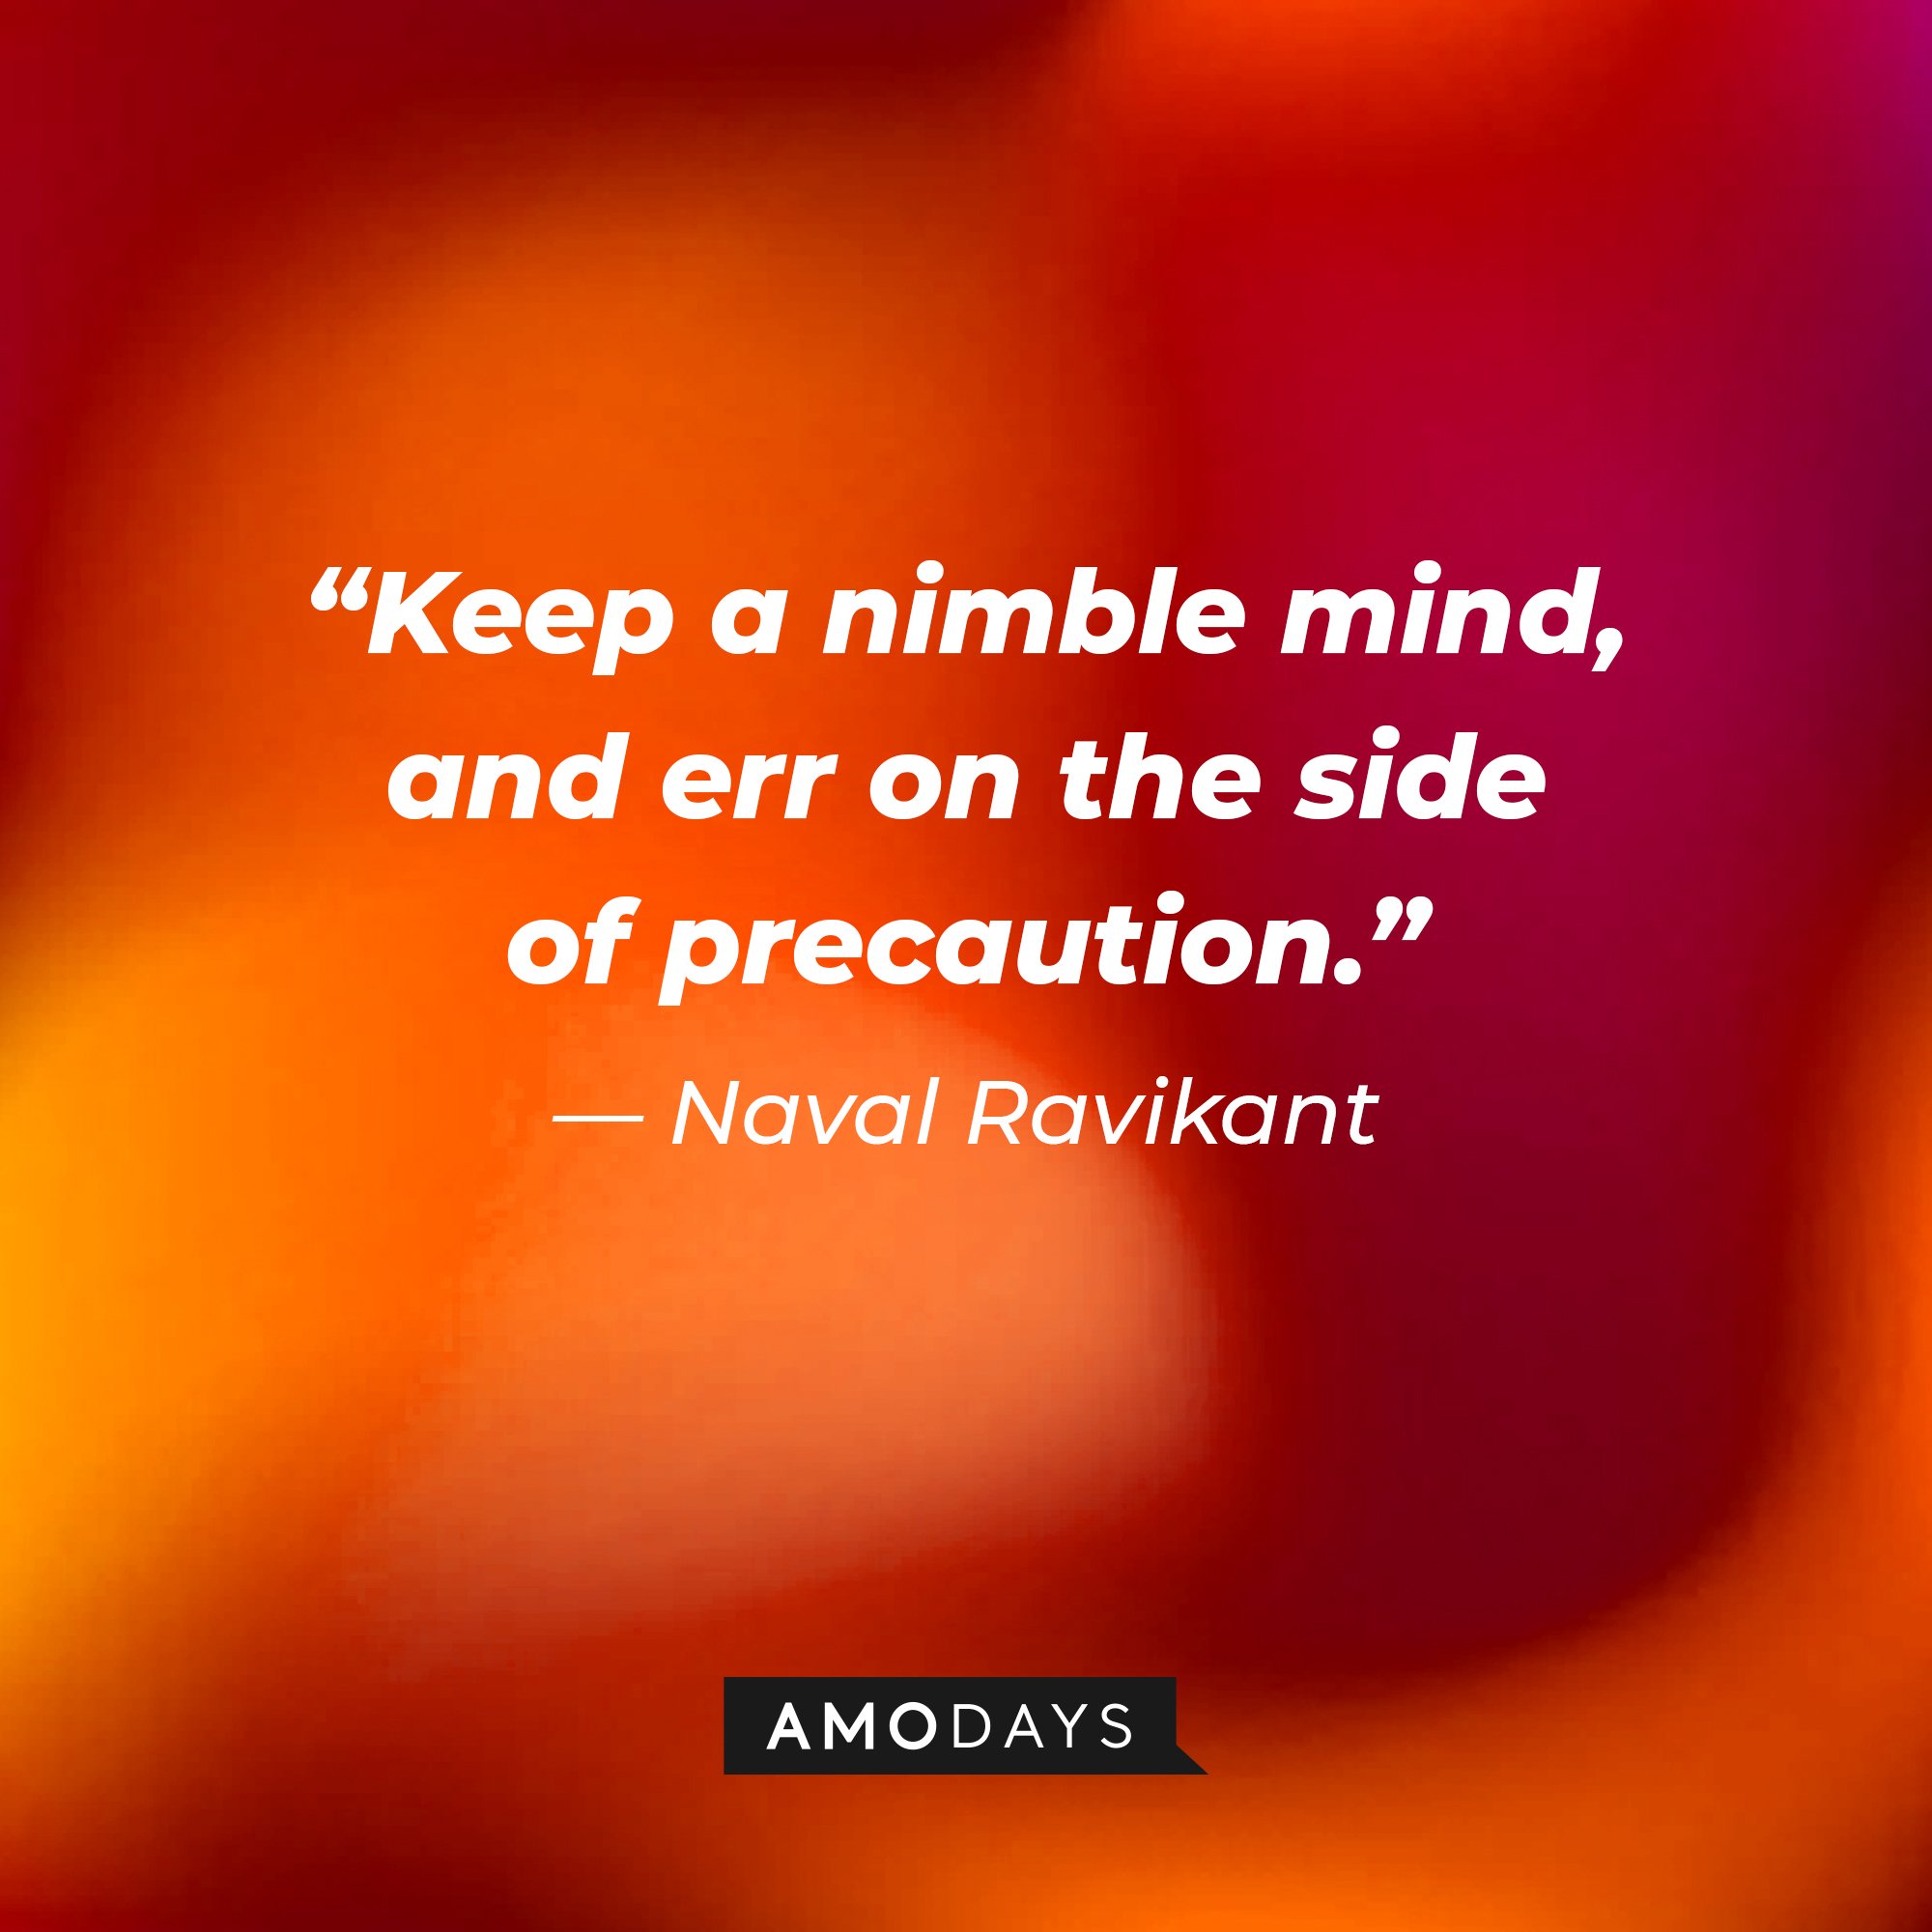  Naval Ravikant's quote: “Keep a nimble mind, and err on the side of precaution. | Image: AmoDays